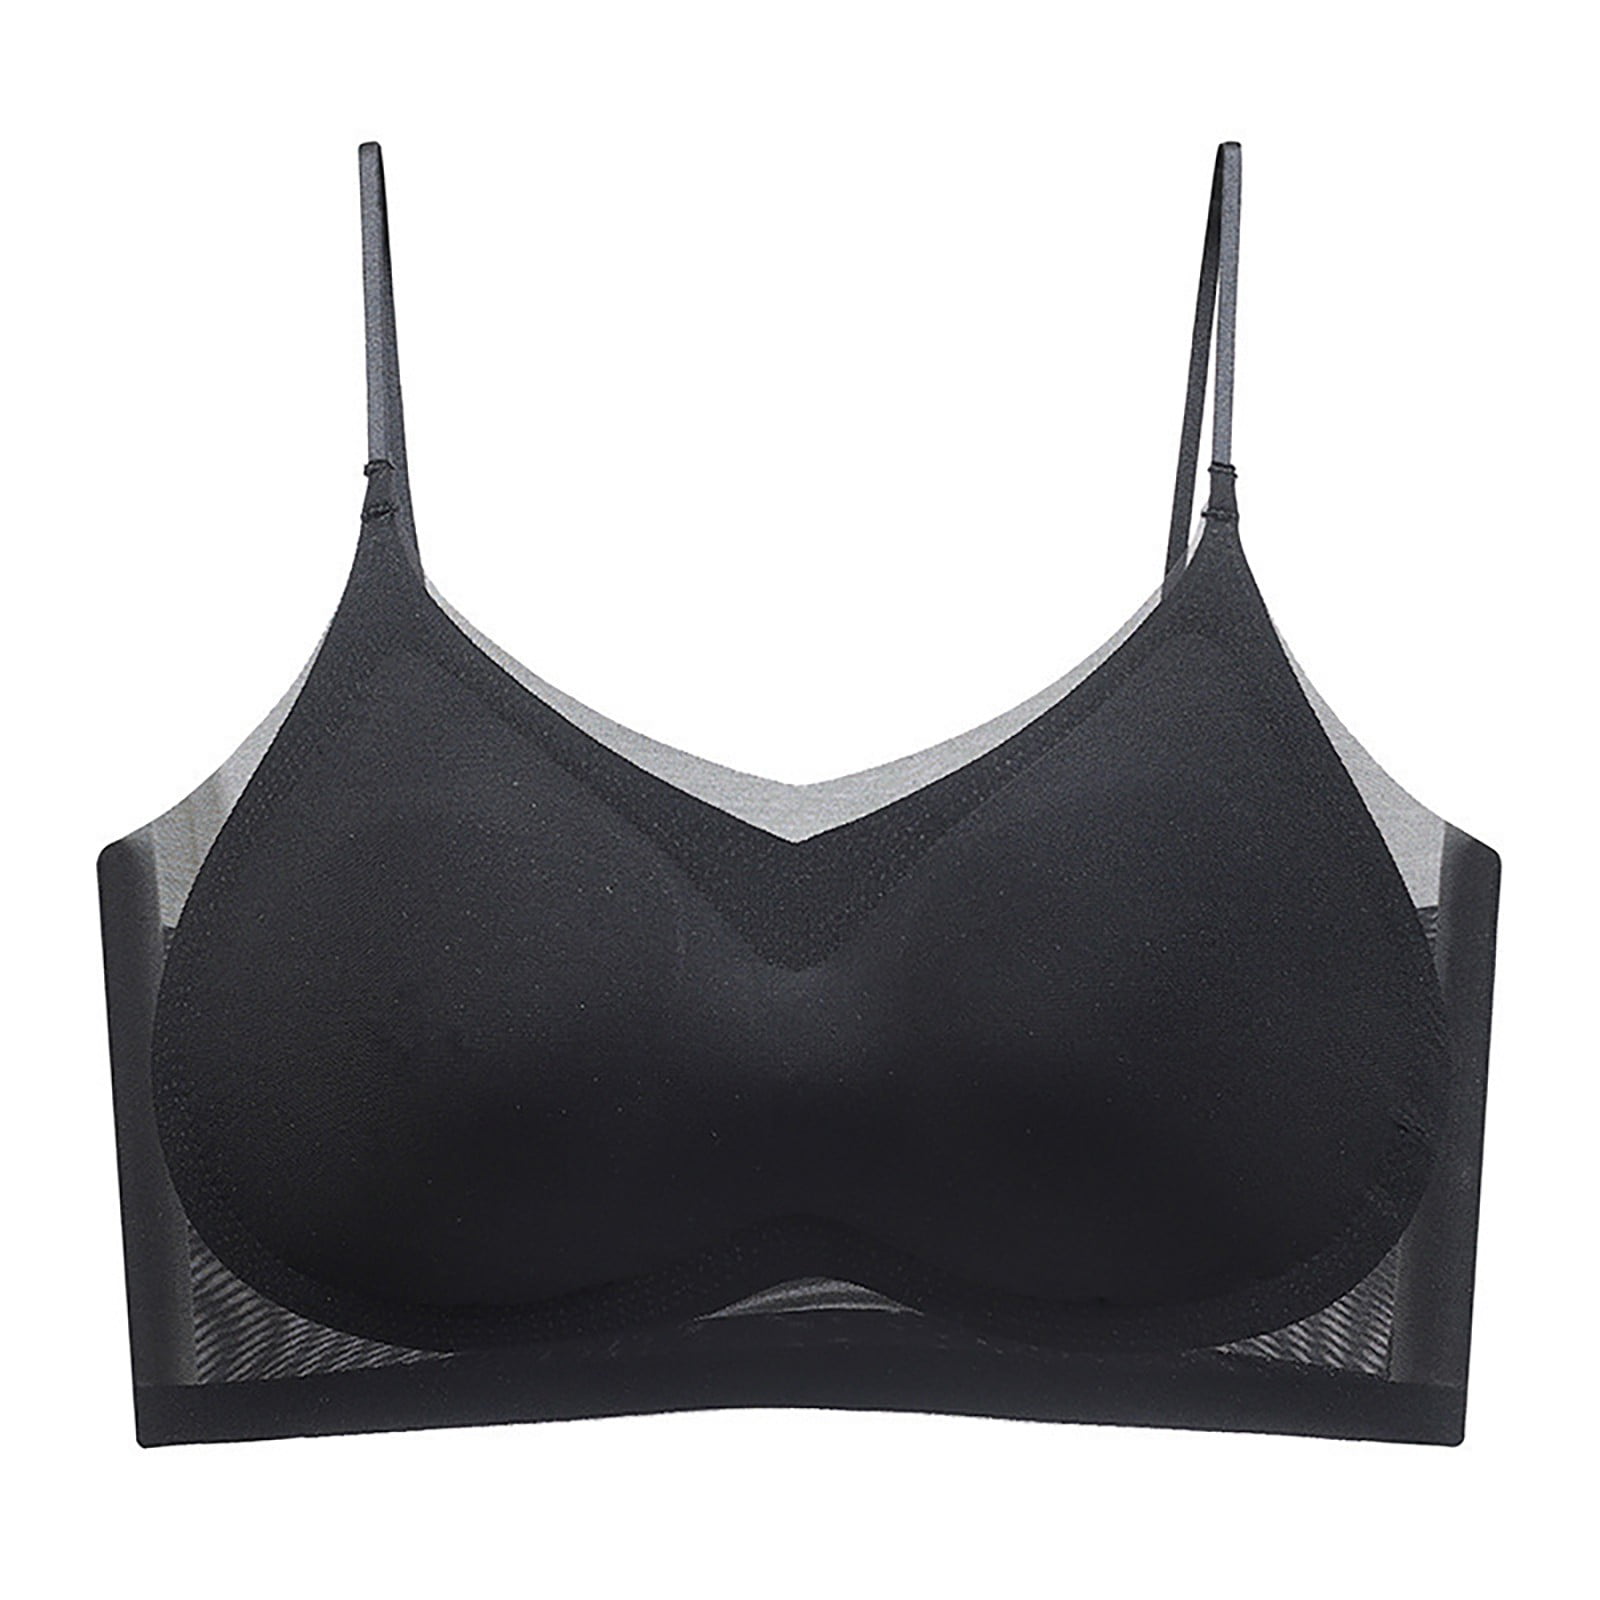 Pseurrlt Ultra-thin summer comfort bra made of ice silk in plus size,  ultra-thin ice silk bra, ice silk air bra with removable padding,  breathable and lightweight, seamless bra for sleeping yoga 